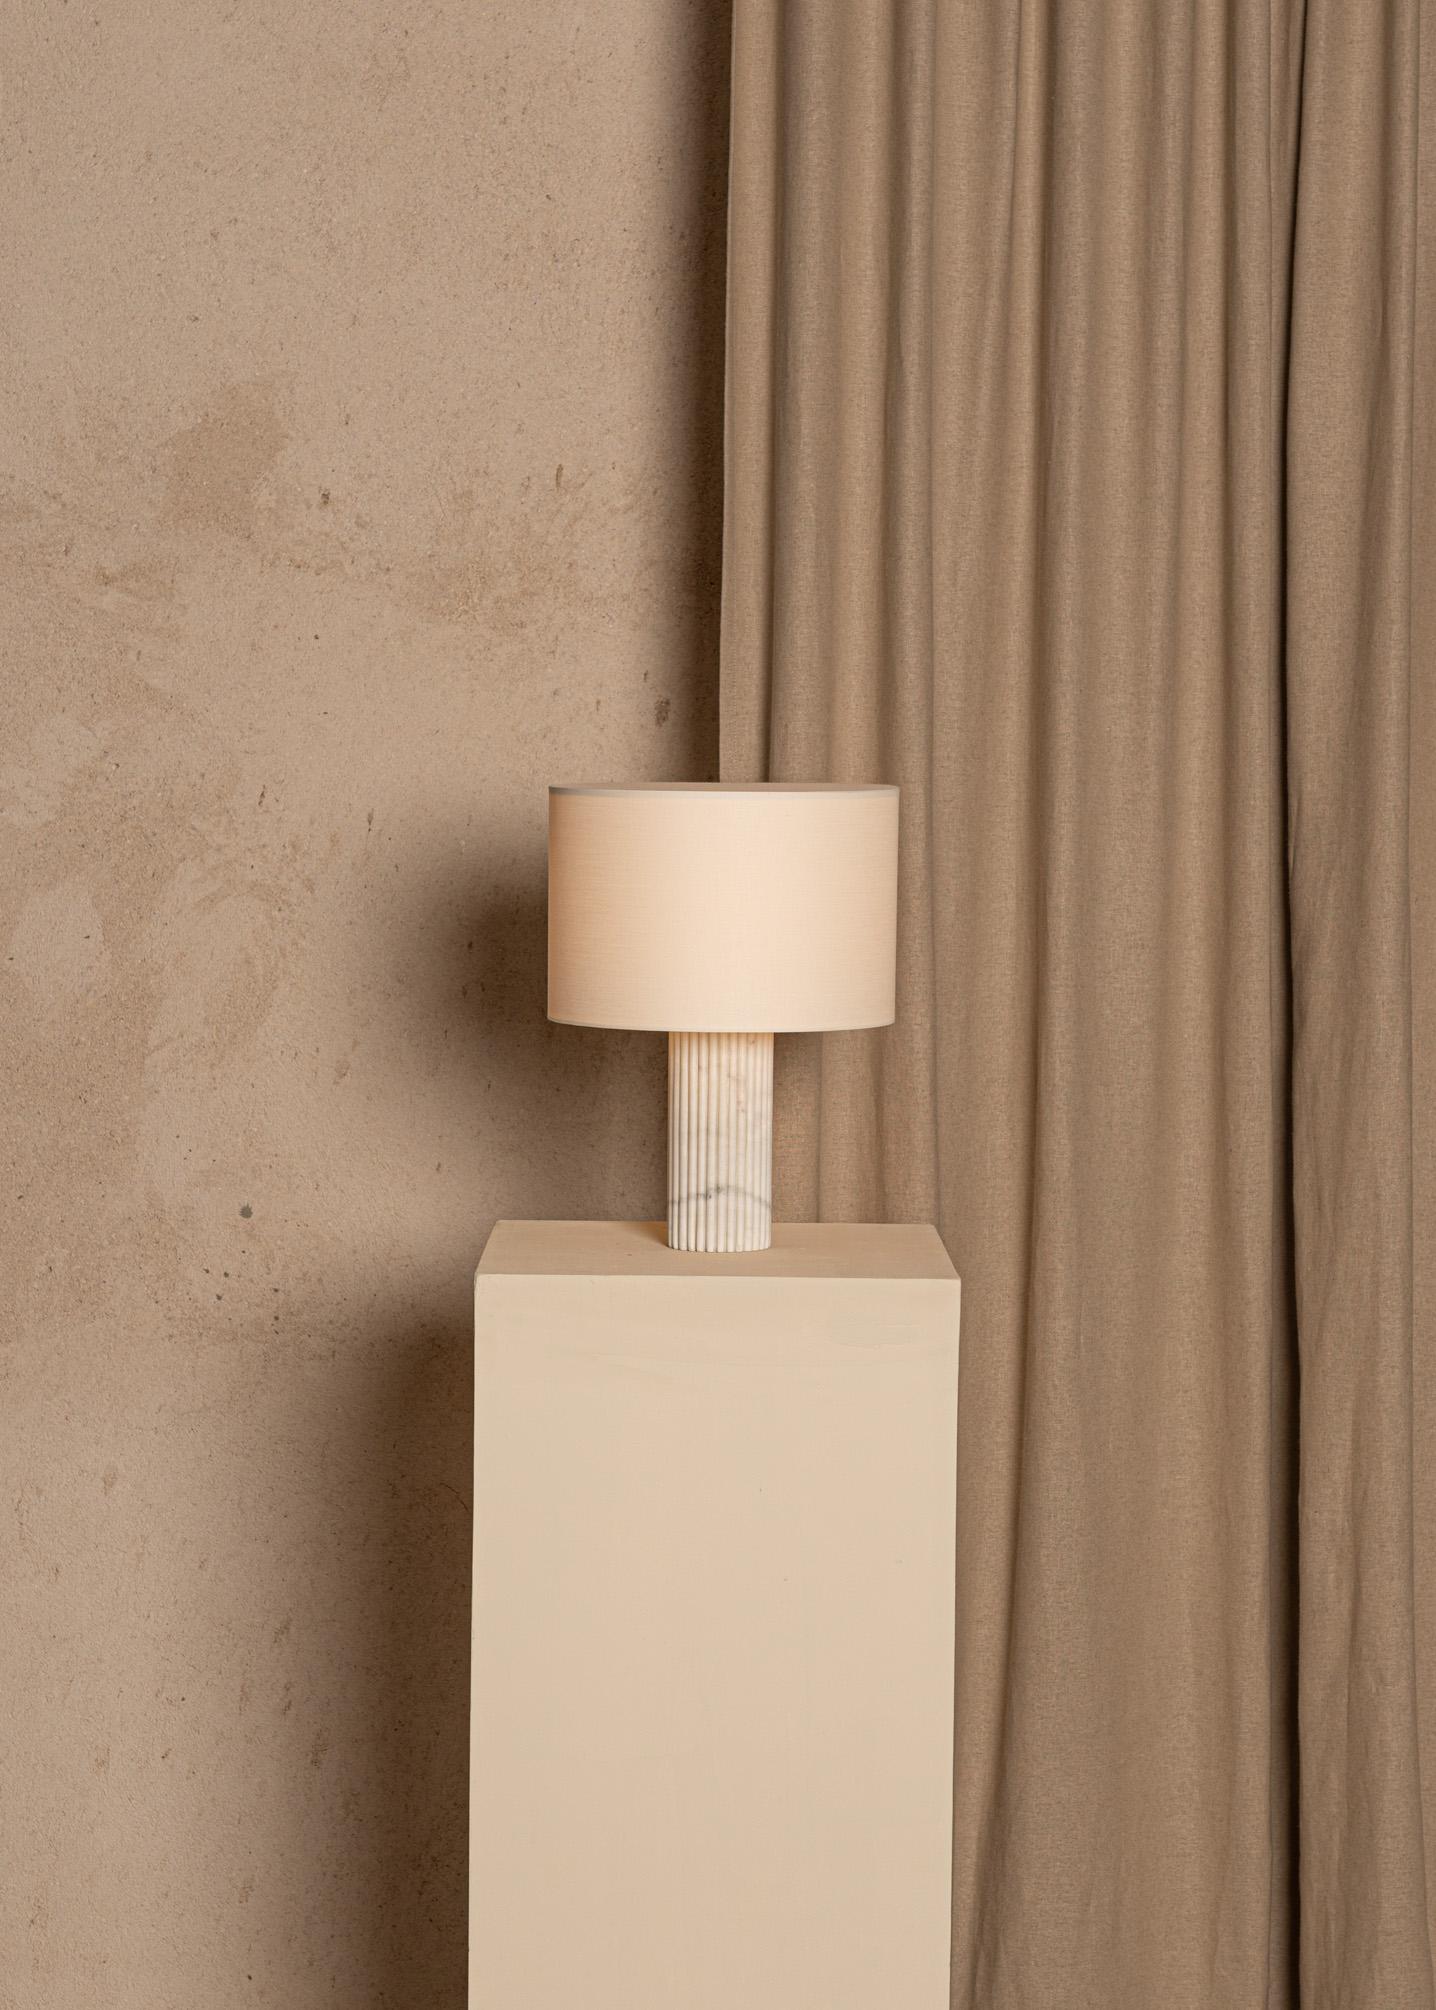 White Marble Flutita Table Lamp by Simone & Marcel
Dimensions: Ø 30 x H 40 cm.
Materials: Cotton and white marble.

Also available in different marble and wood options and finishes. Custom options available on request. Please contact us. 

All our